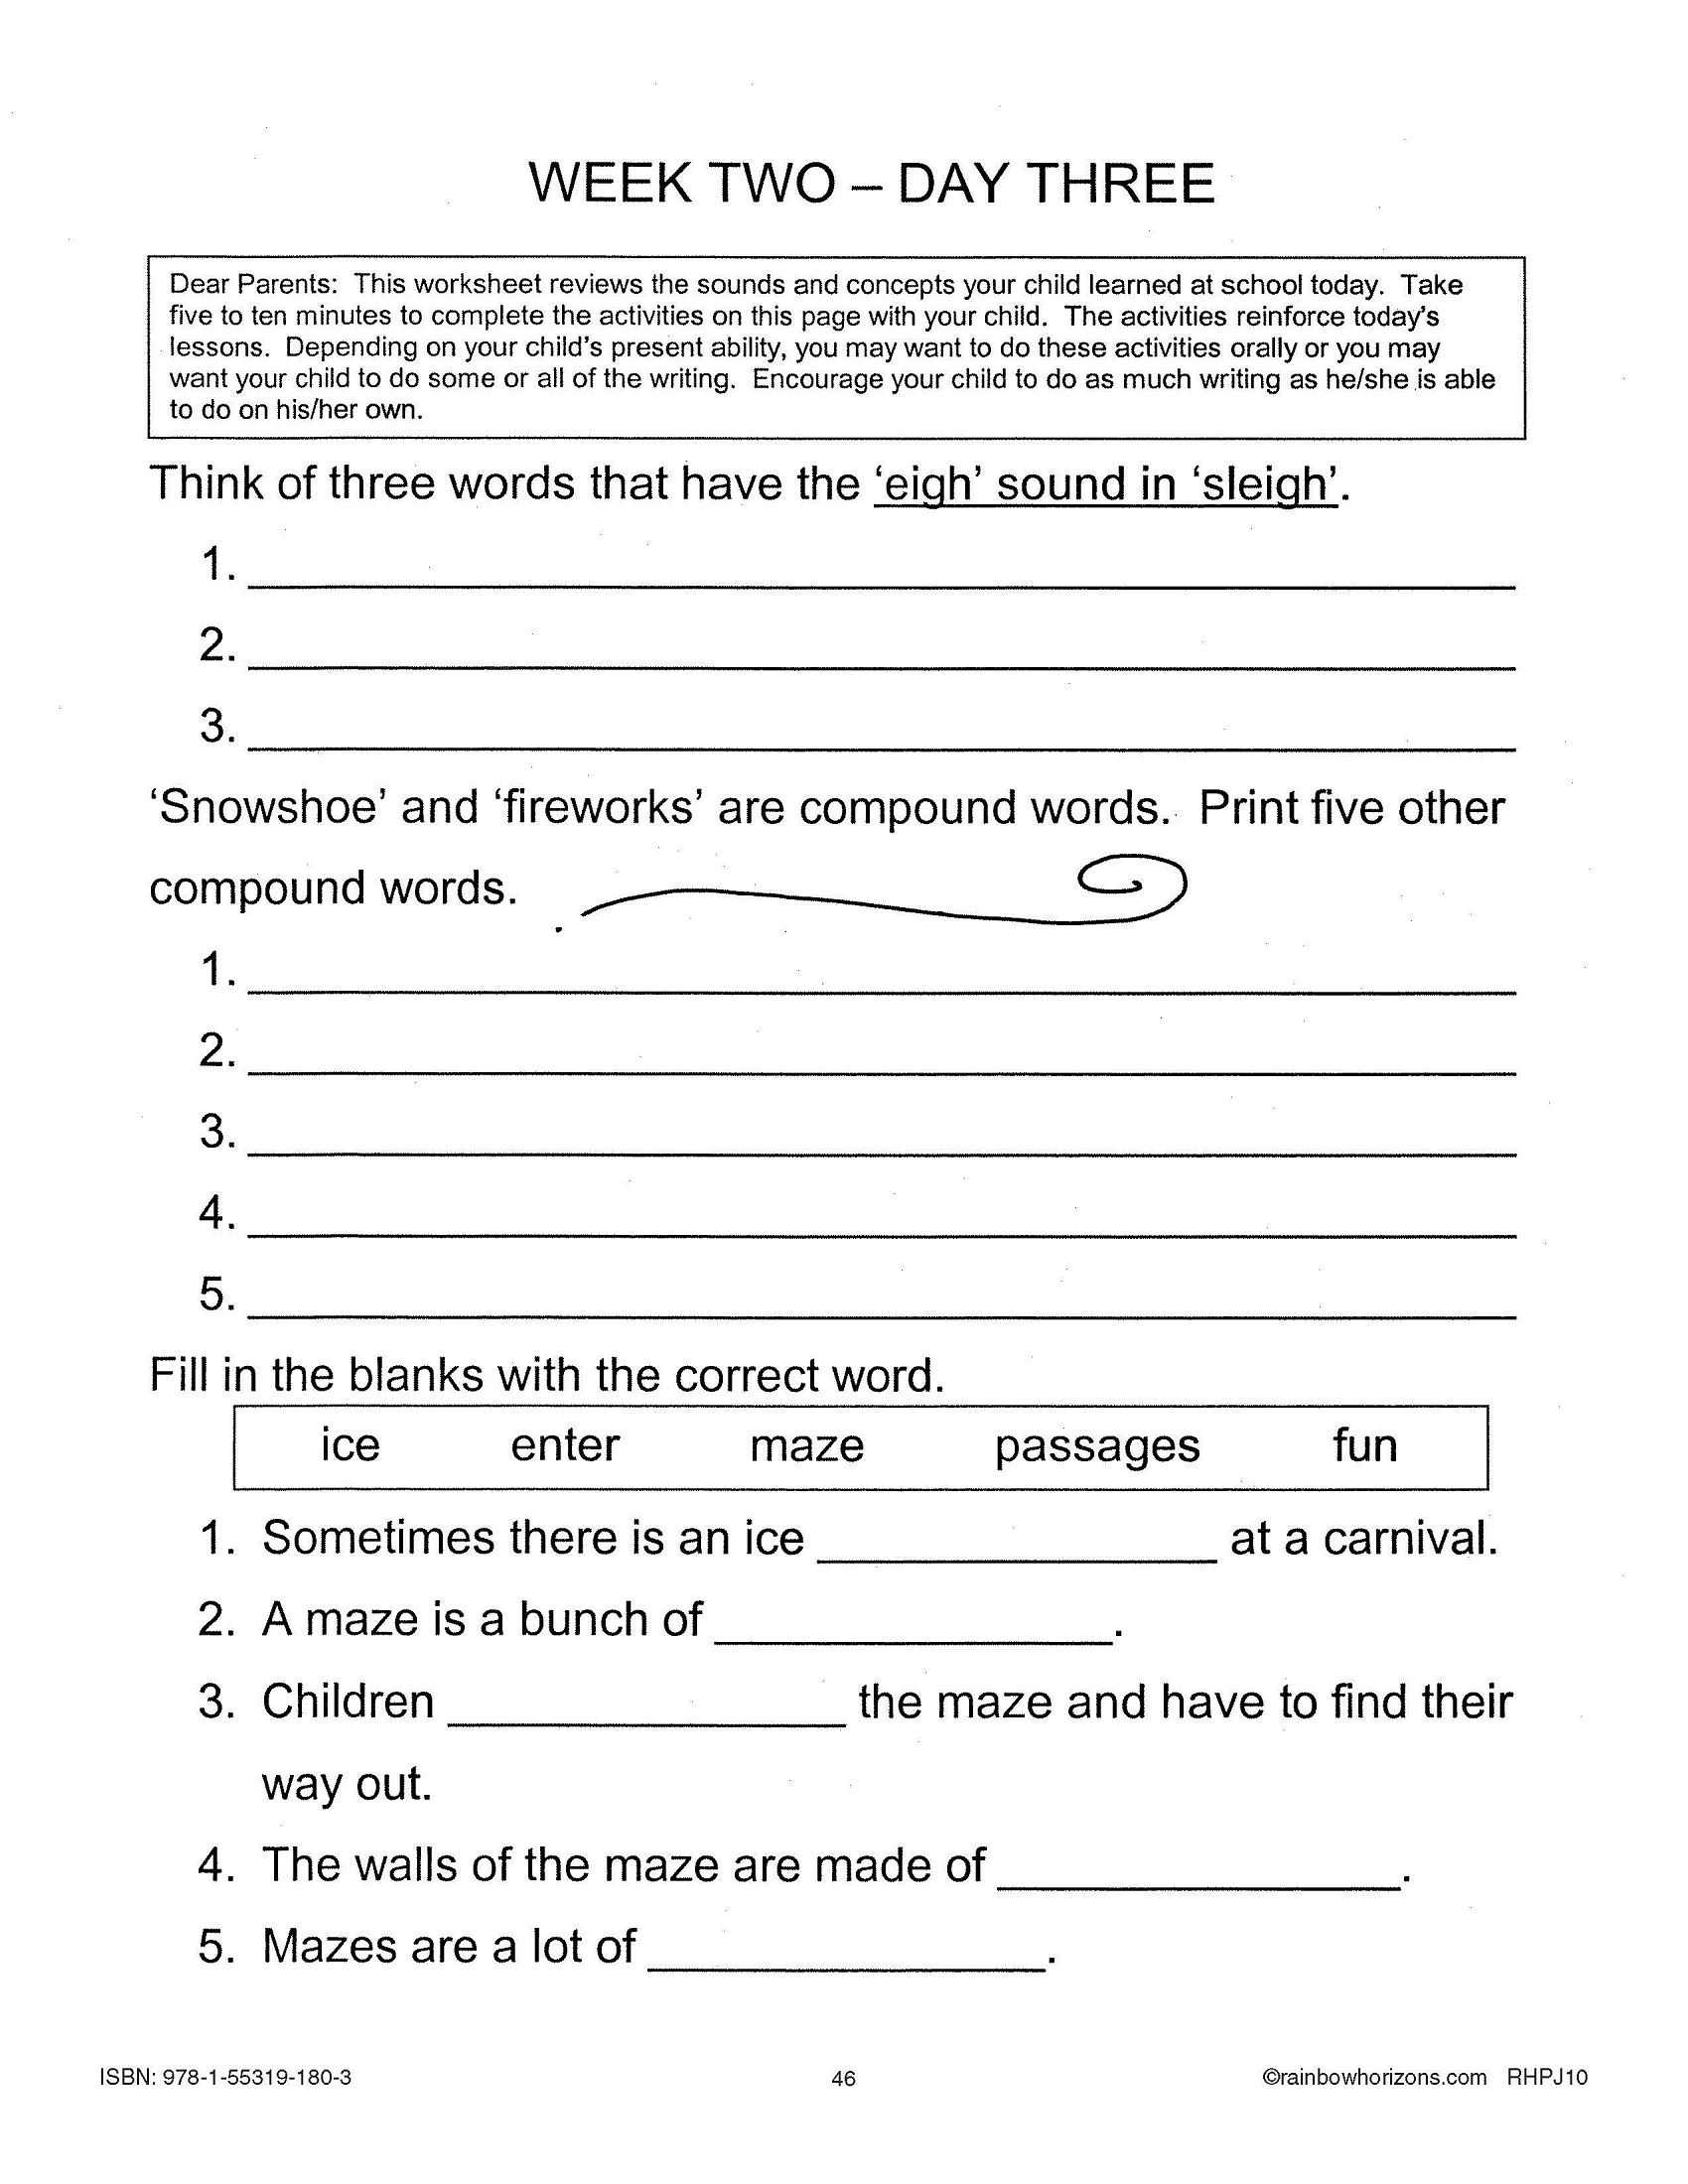 Food Web Worksheet Answers Also Plete A Worksheet On Ice Skating with This Free Activity From Ccp